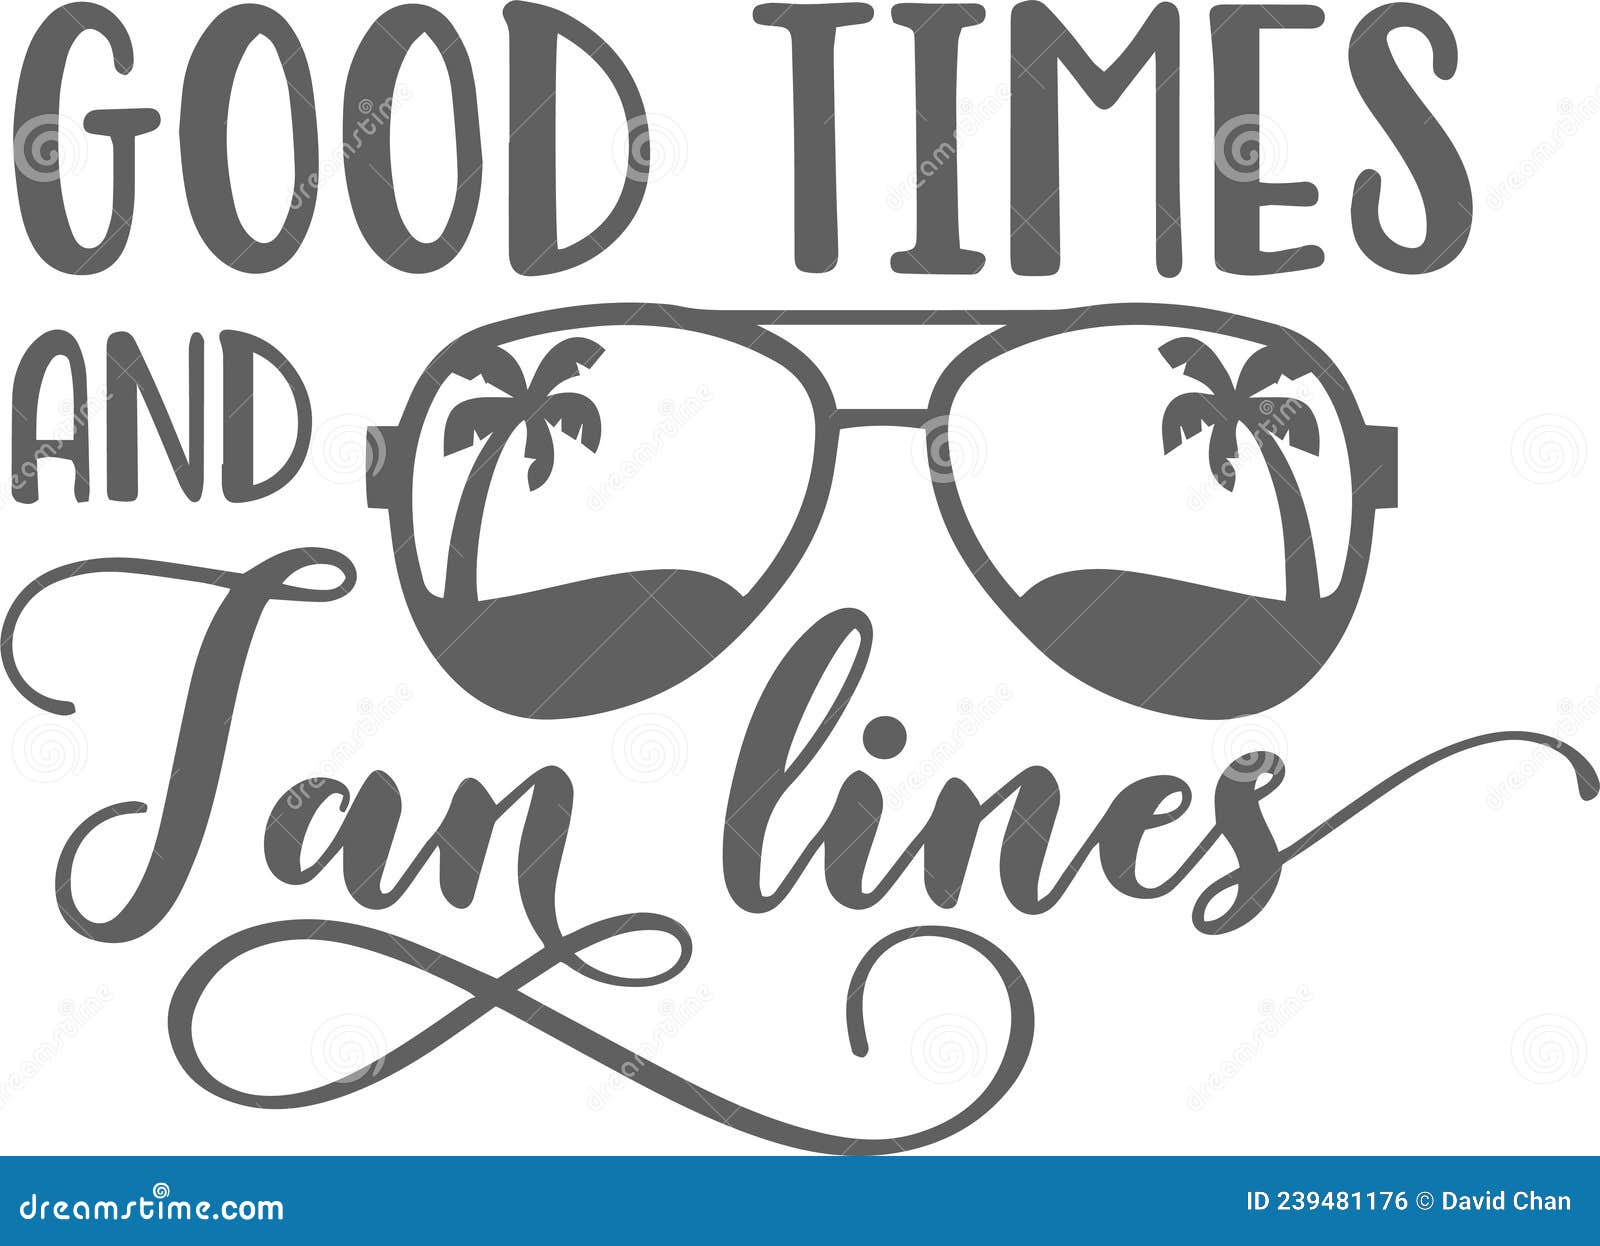 Good Times and Tan Lines Inspirational Quotes Stock Vector ...